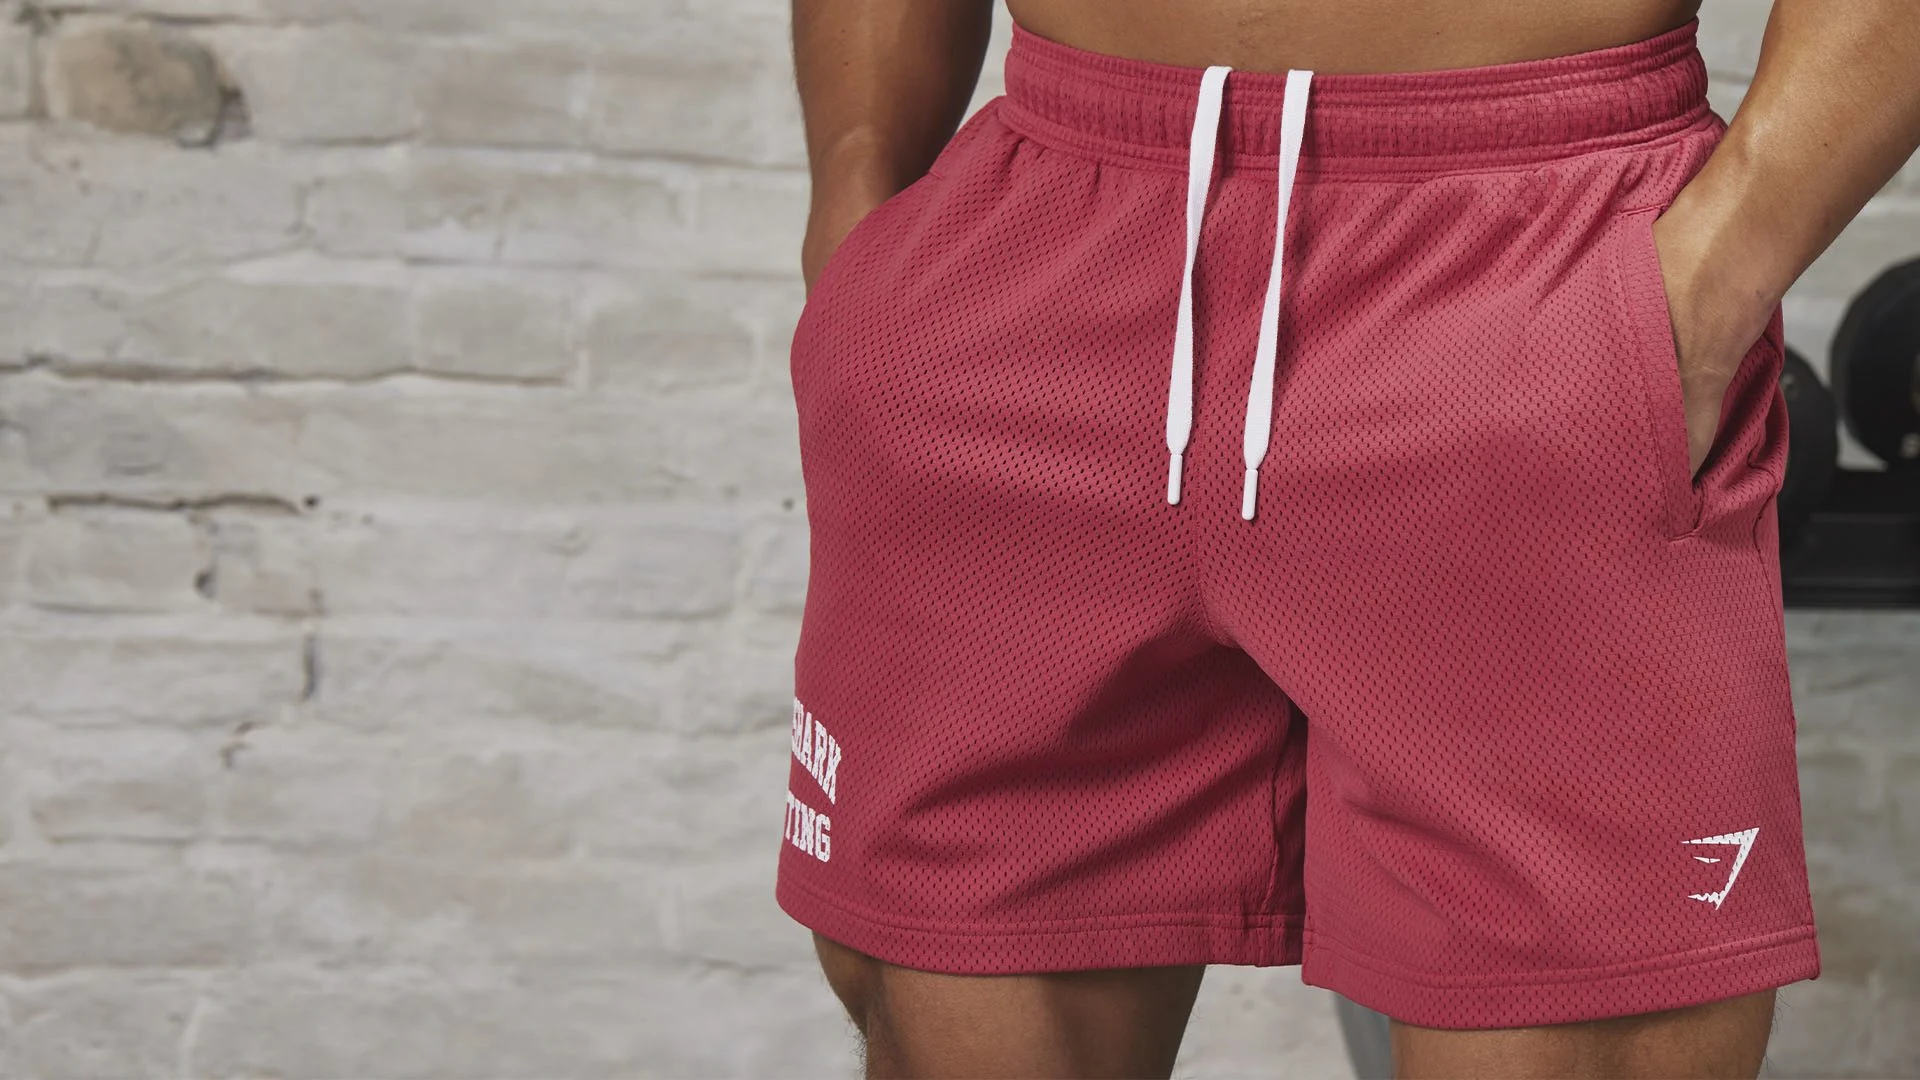 THE BEST MESH SHORTS